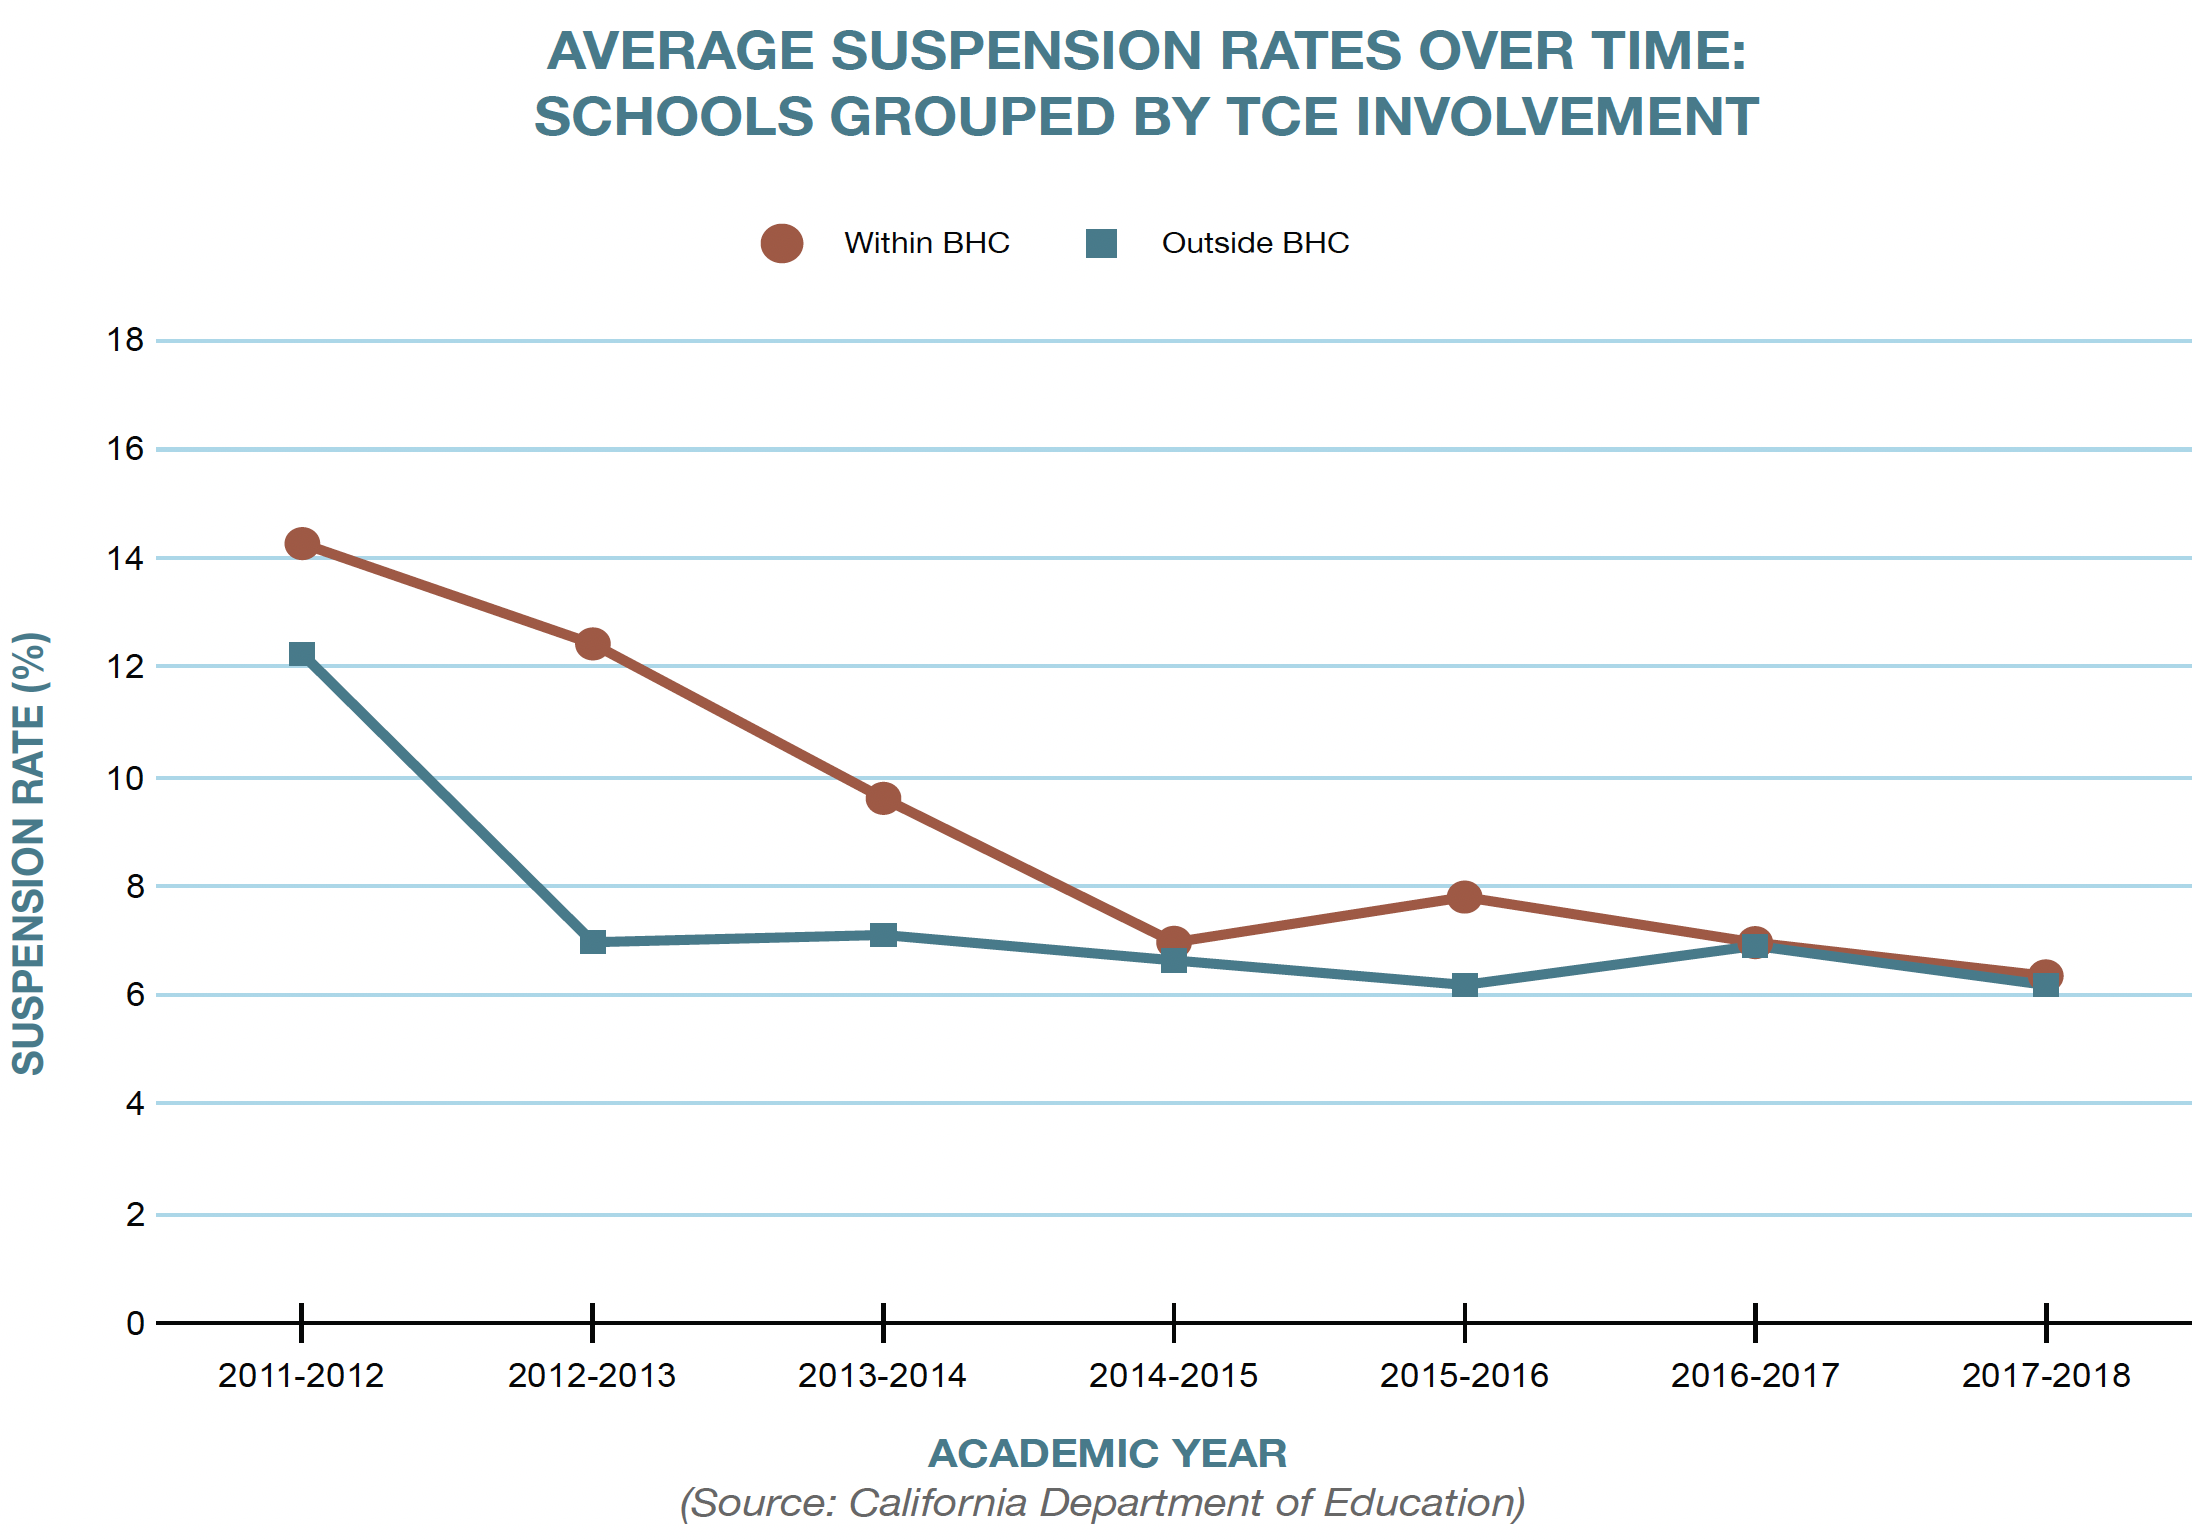 Is It Time to Suspend School Suspensions?